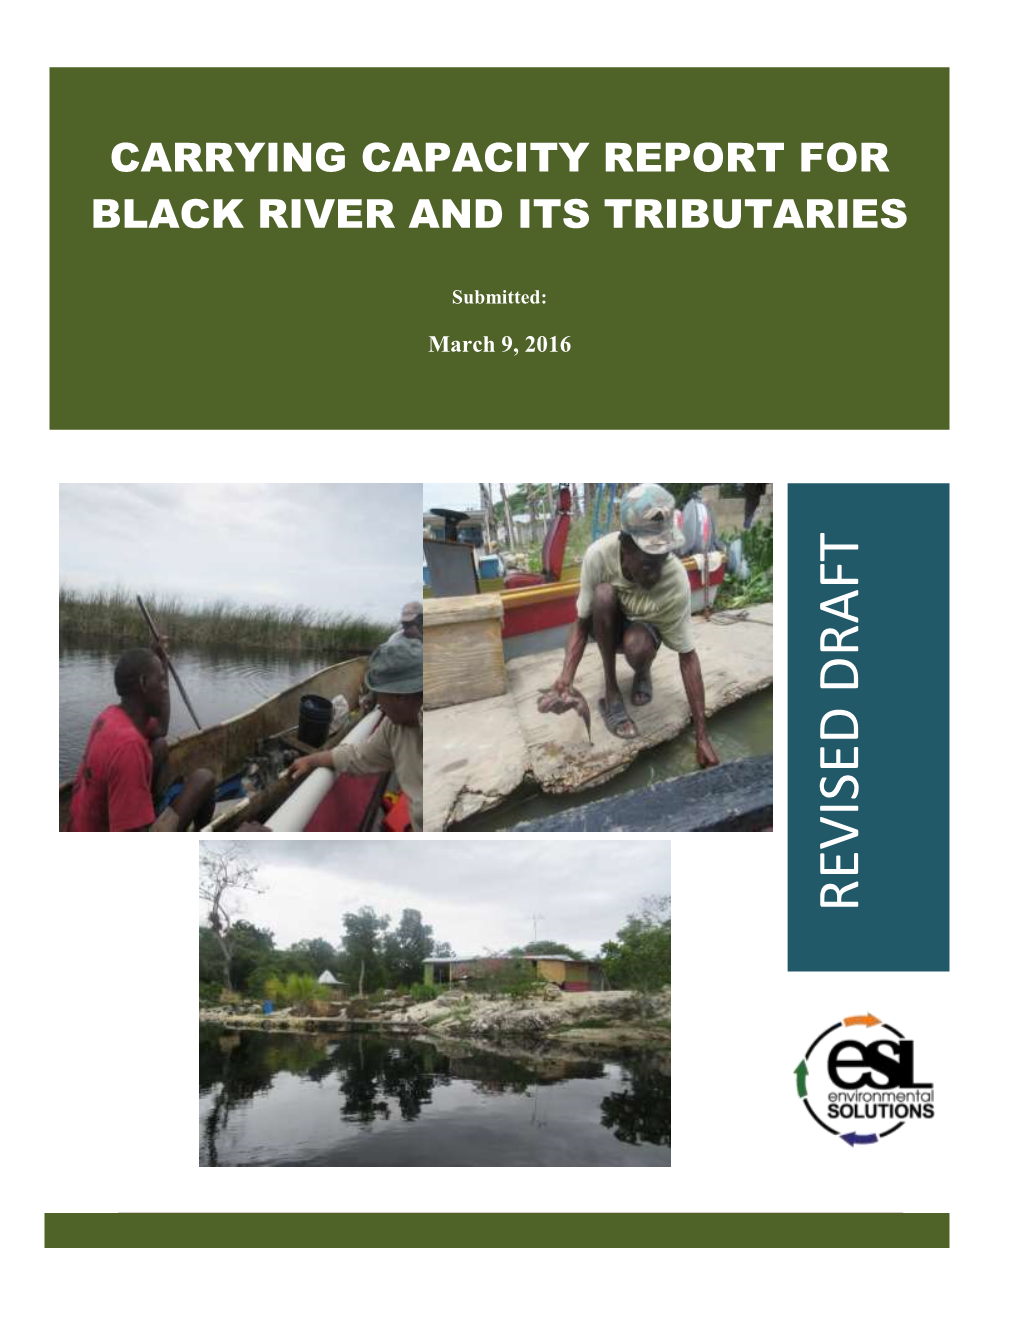 Carrying Capacity Report for Black River and Its Tributaries